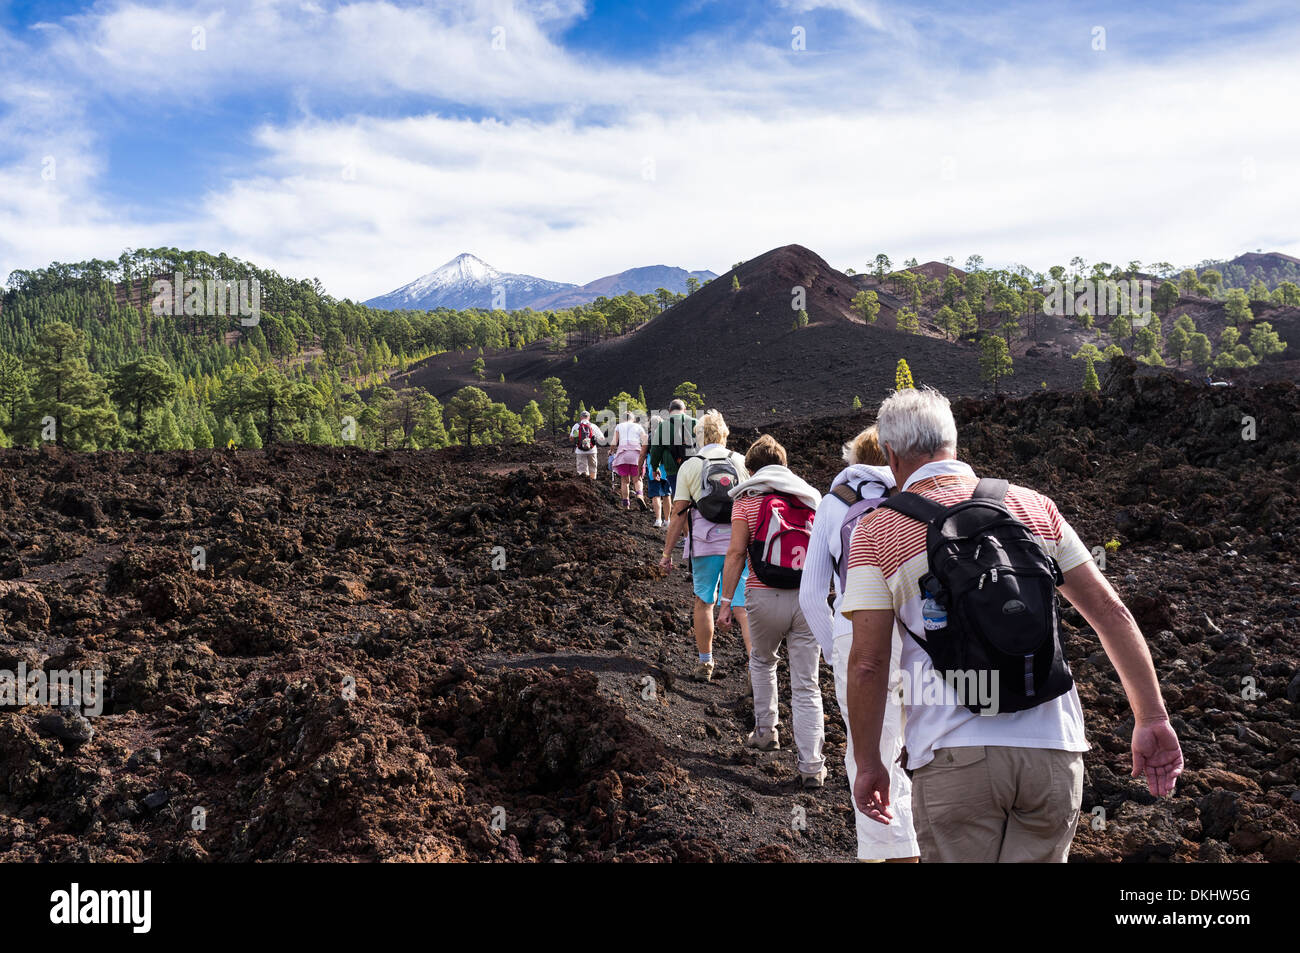 A group of walkers in single file cross a rocky lava flow in Chinyero with a snowcapped teide in the background, Tenerife. Stock Photo